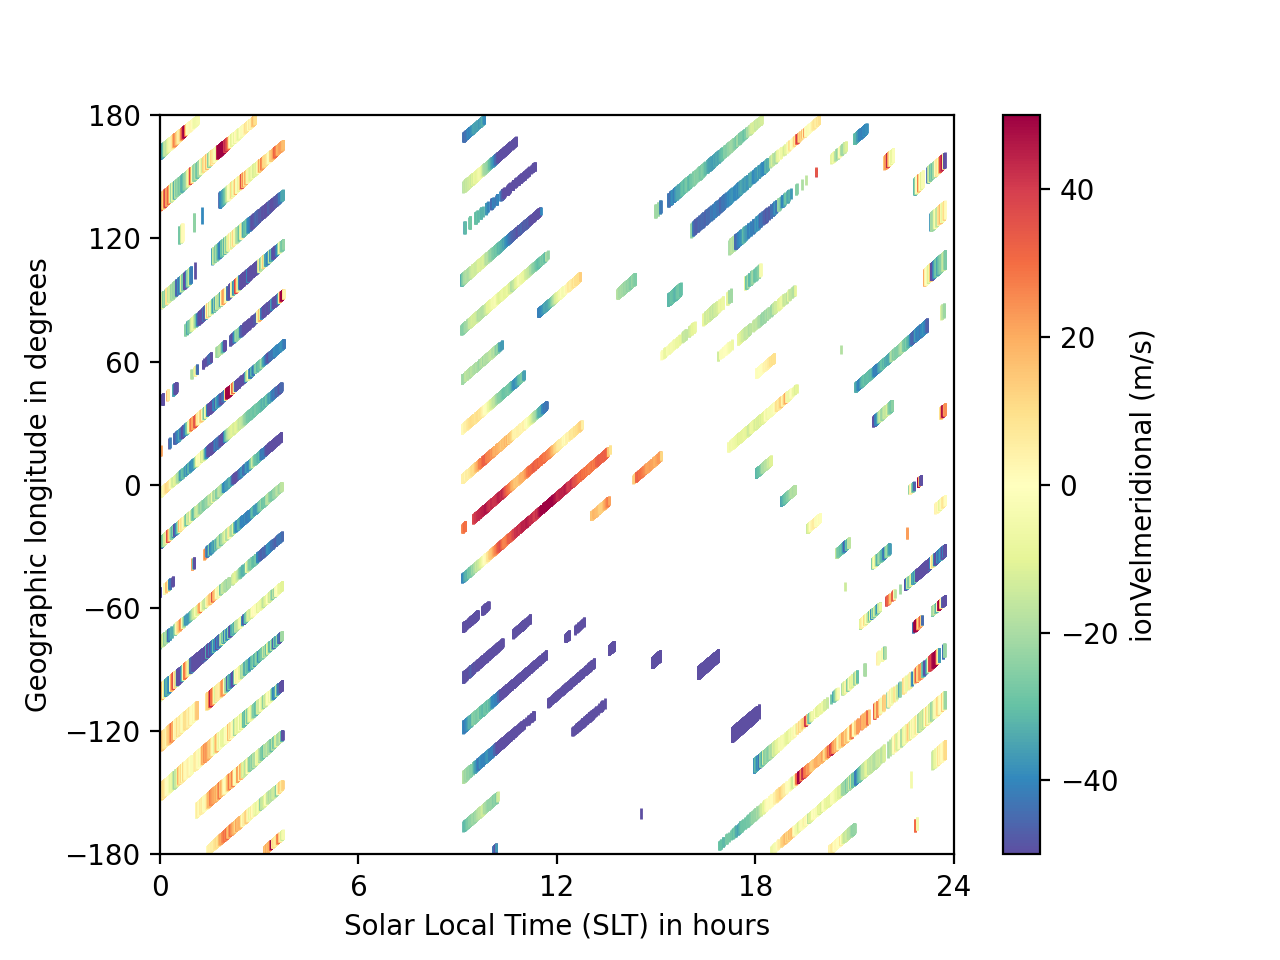 Scatter plot with color indicating CINDI ExB drift value and size the DINEOFs ExB drift magnitude